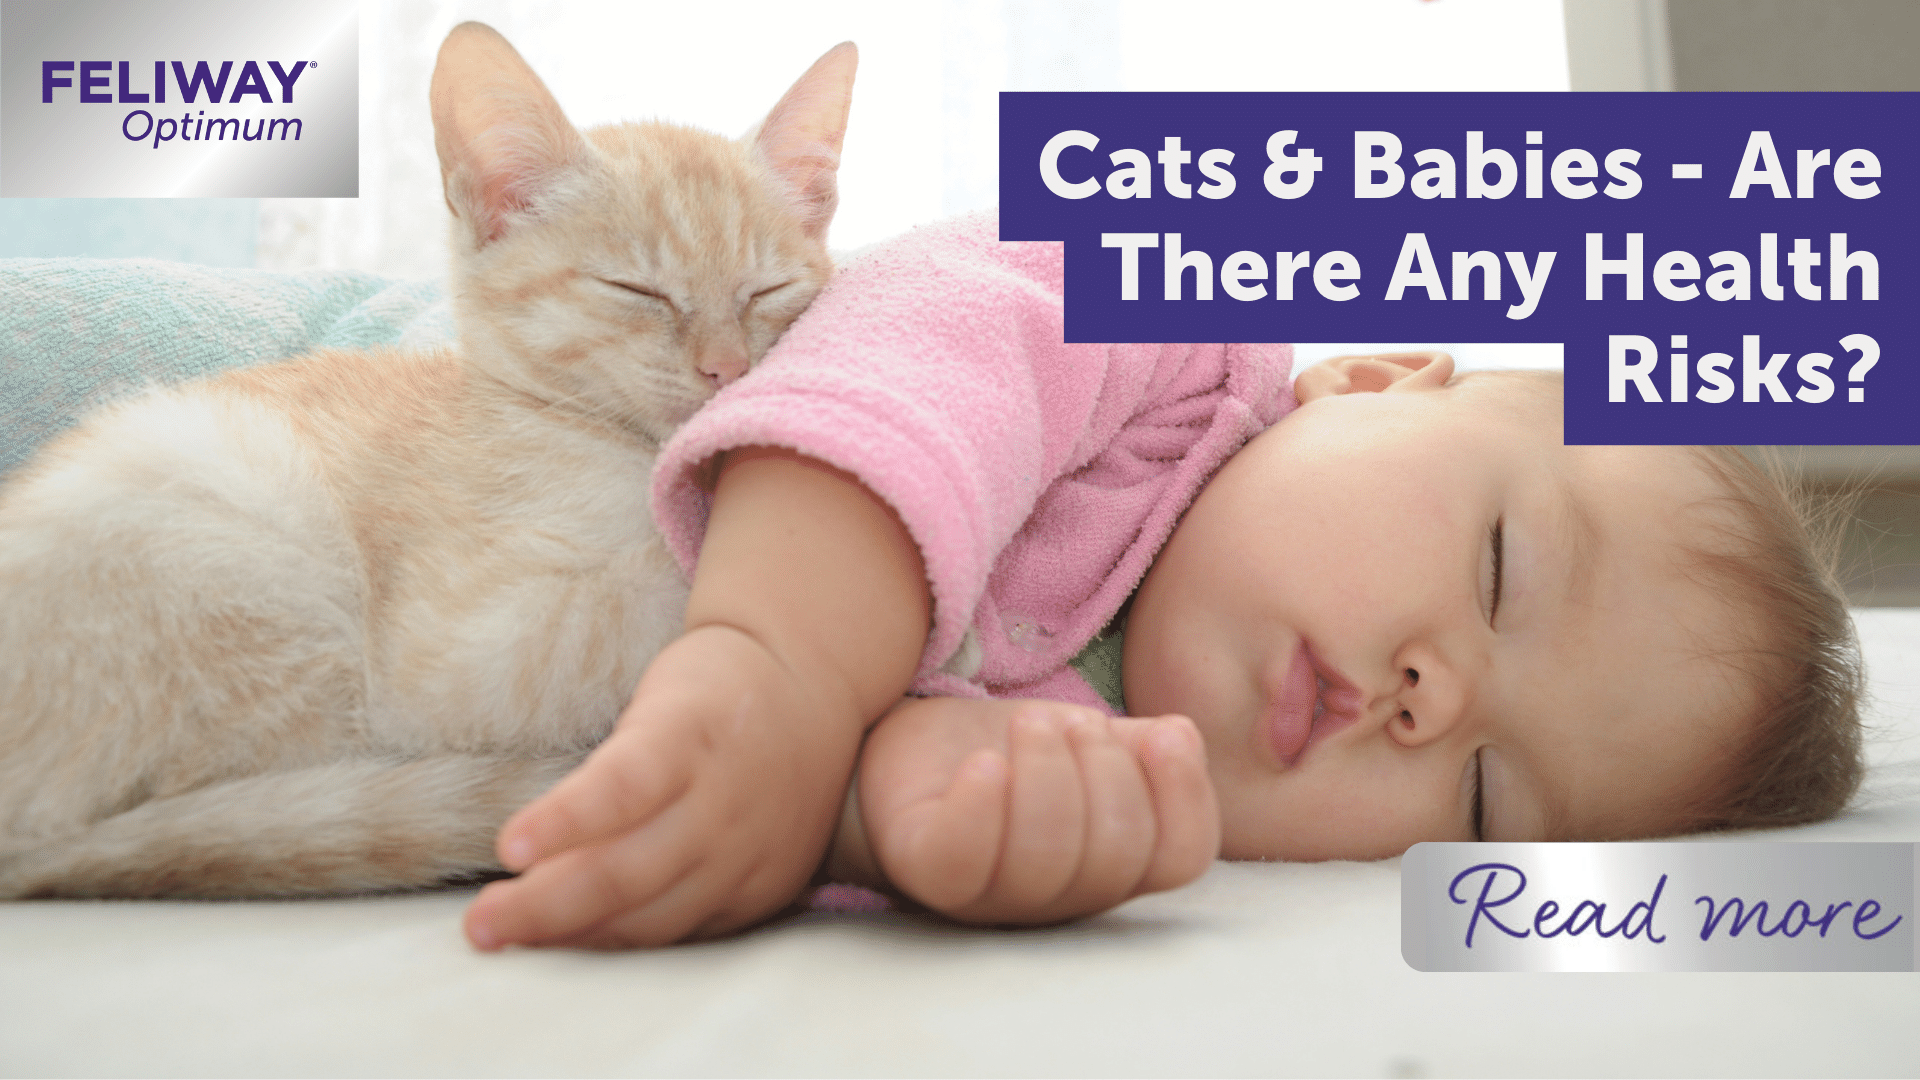 Cats and Babies - Are There Any Health Risks To Be Aware Of